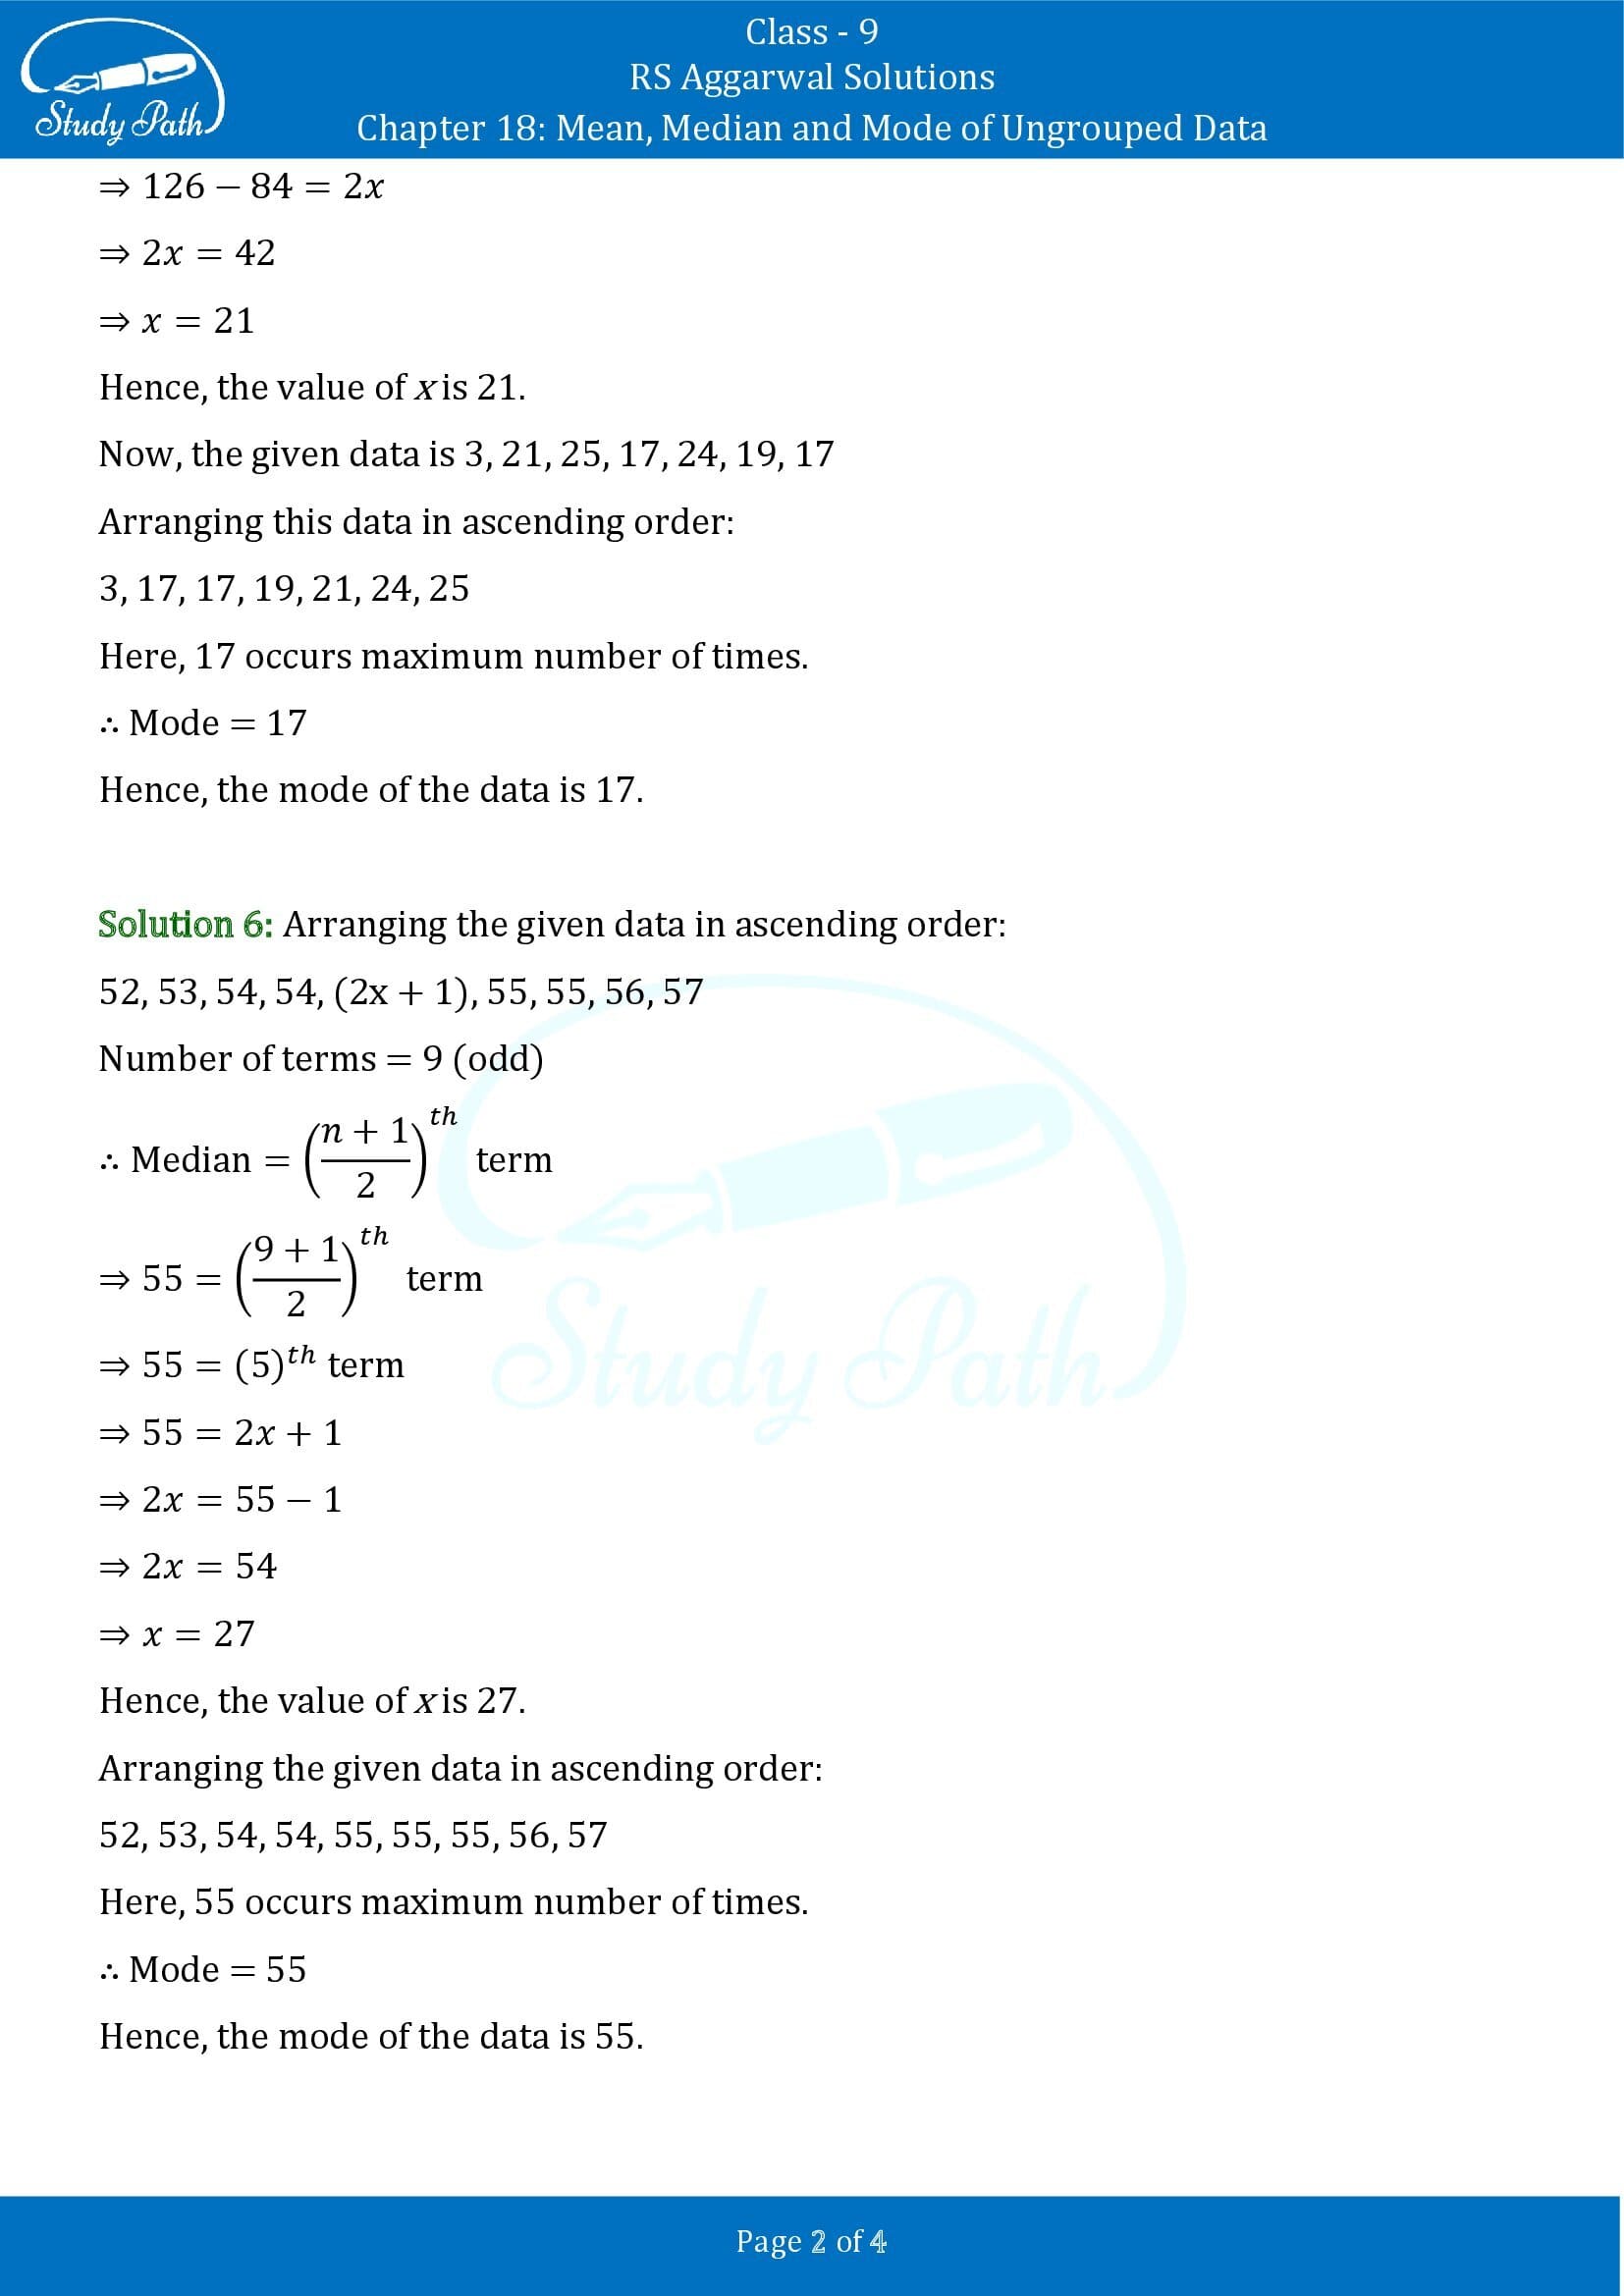 RS Aggarwal Solutions Class 9 Chapter 18 Mean Median and Mode of Ungrouped Data Exercise 18D 00002